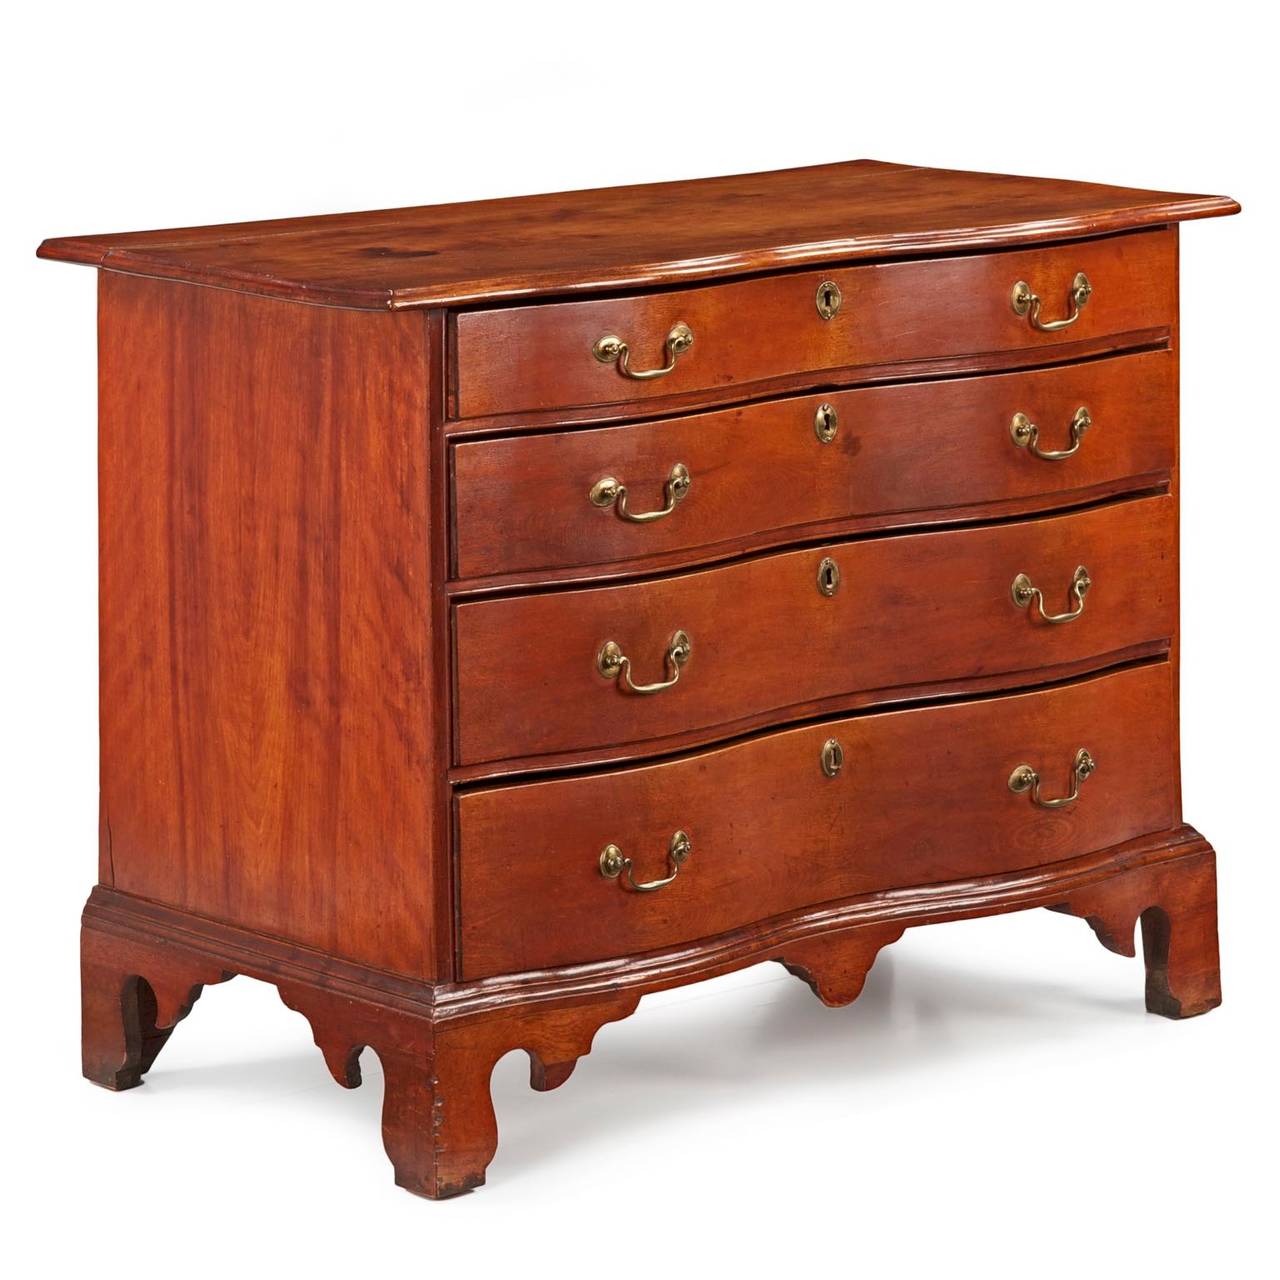 A rather striking chest of drawers, the oxbow is a particularly difficult form to master and added significant cost for clients requesting this kind of case during the period.  The top projects with a distinct boldness over the sides and front of